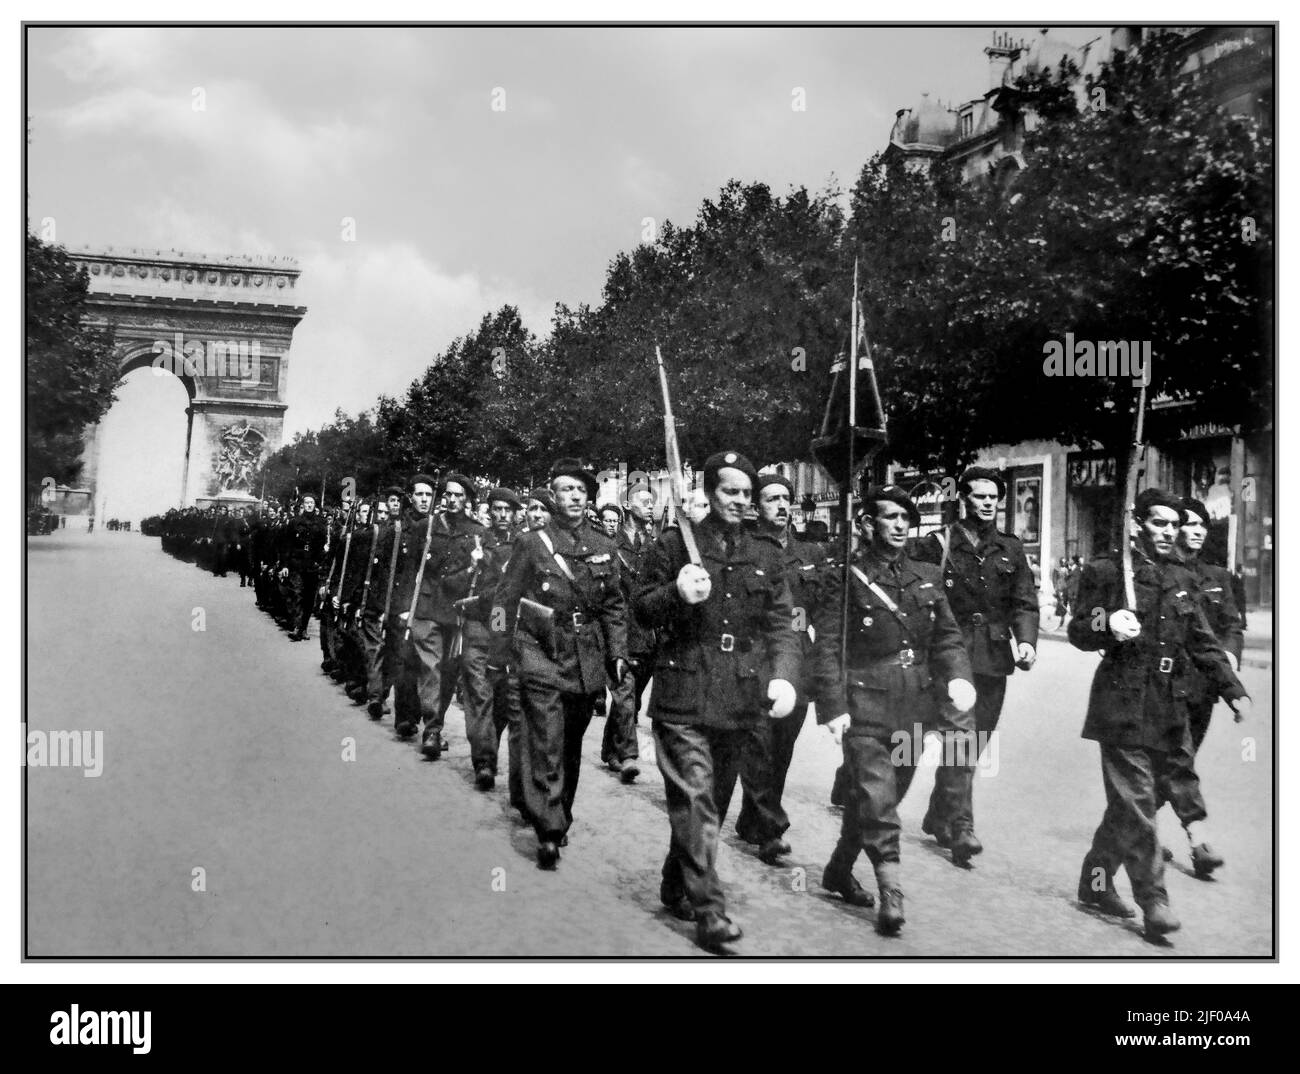 Vichy Paris France Nazi collaborators of Marshall Petain French Militia Battalion army march down the Champs Elysees with Arc de Triomphe in background Paris 1940s WW2 France Stock Photo